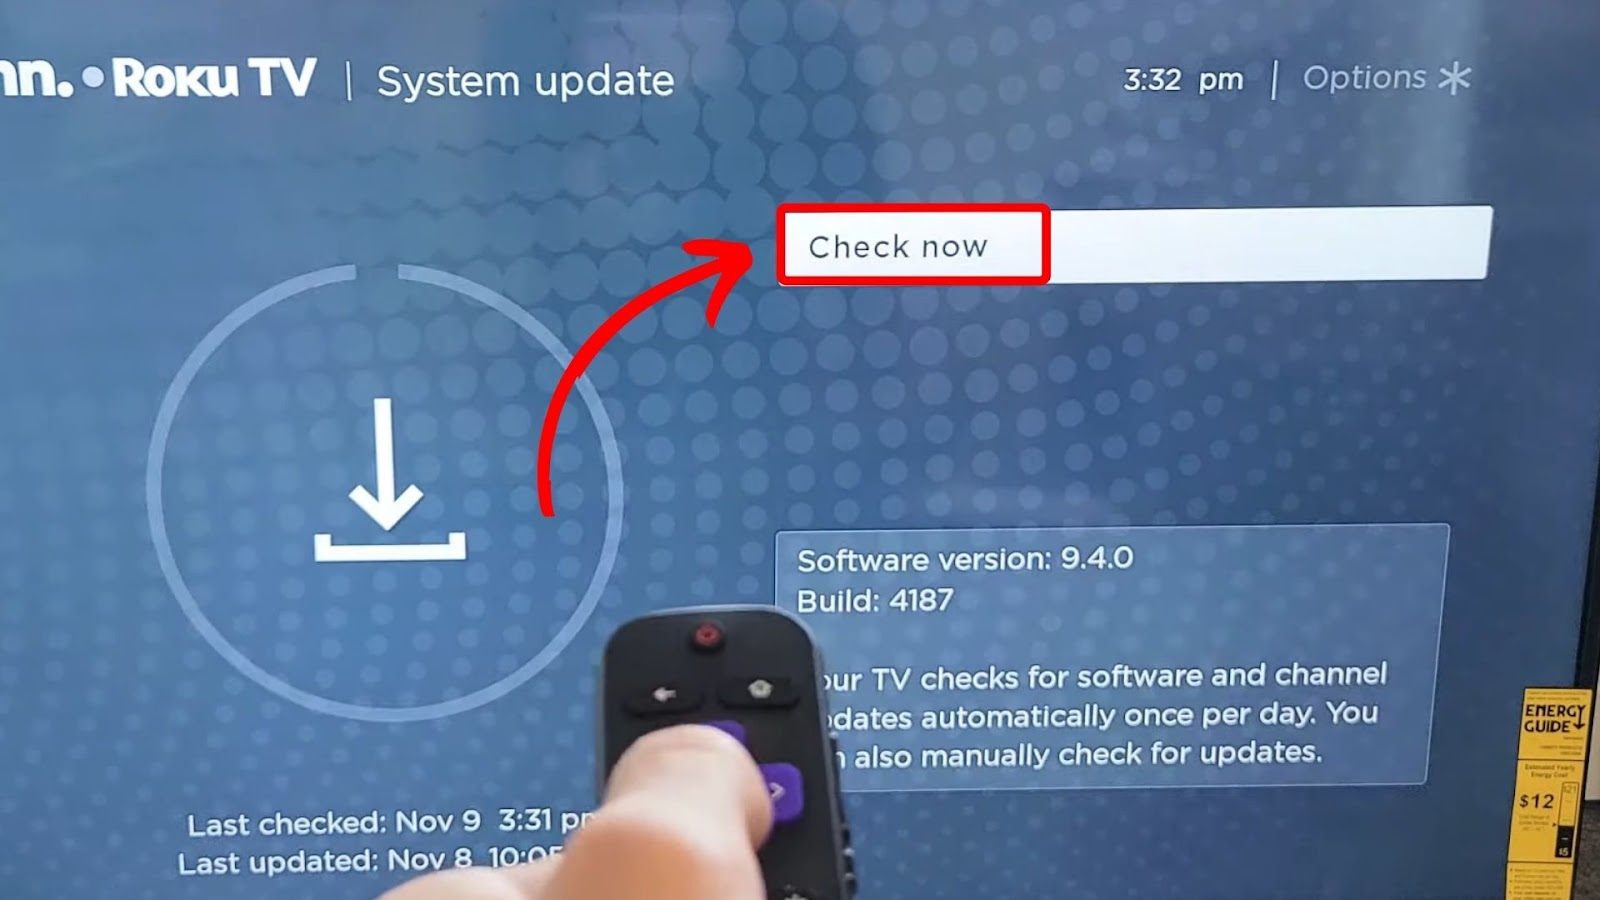 How to Check for System Updates on Roku TV